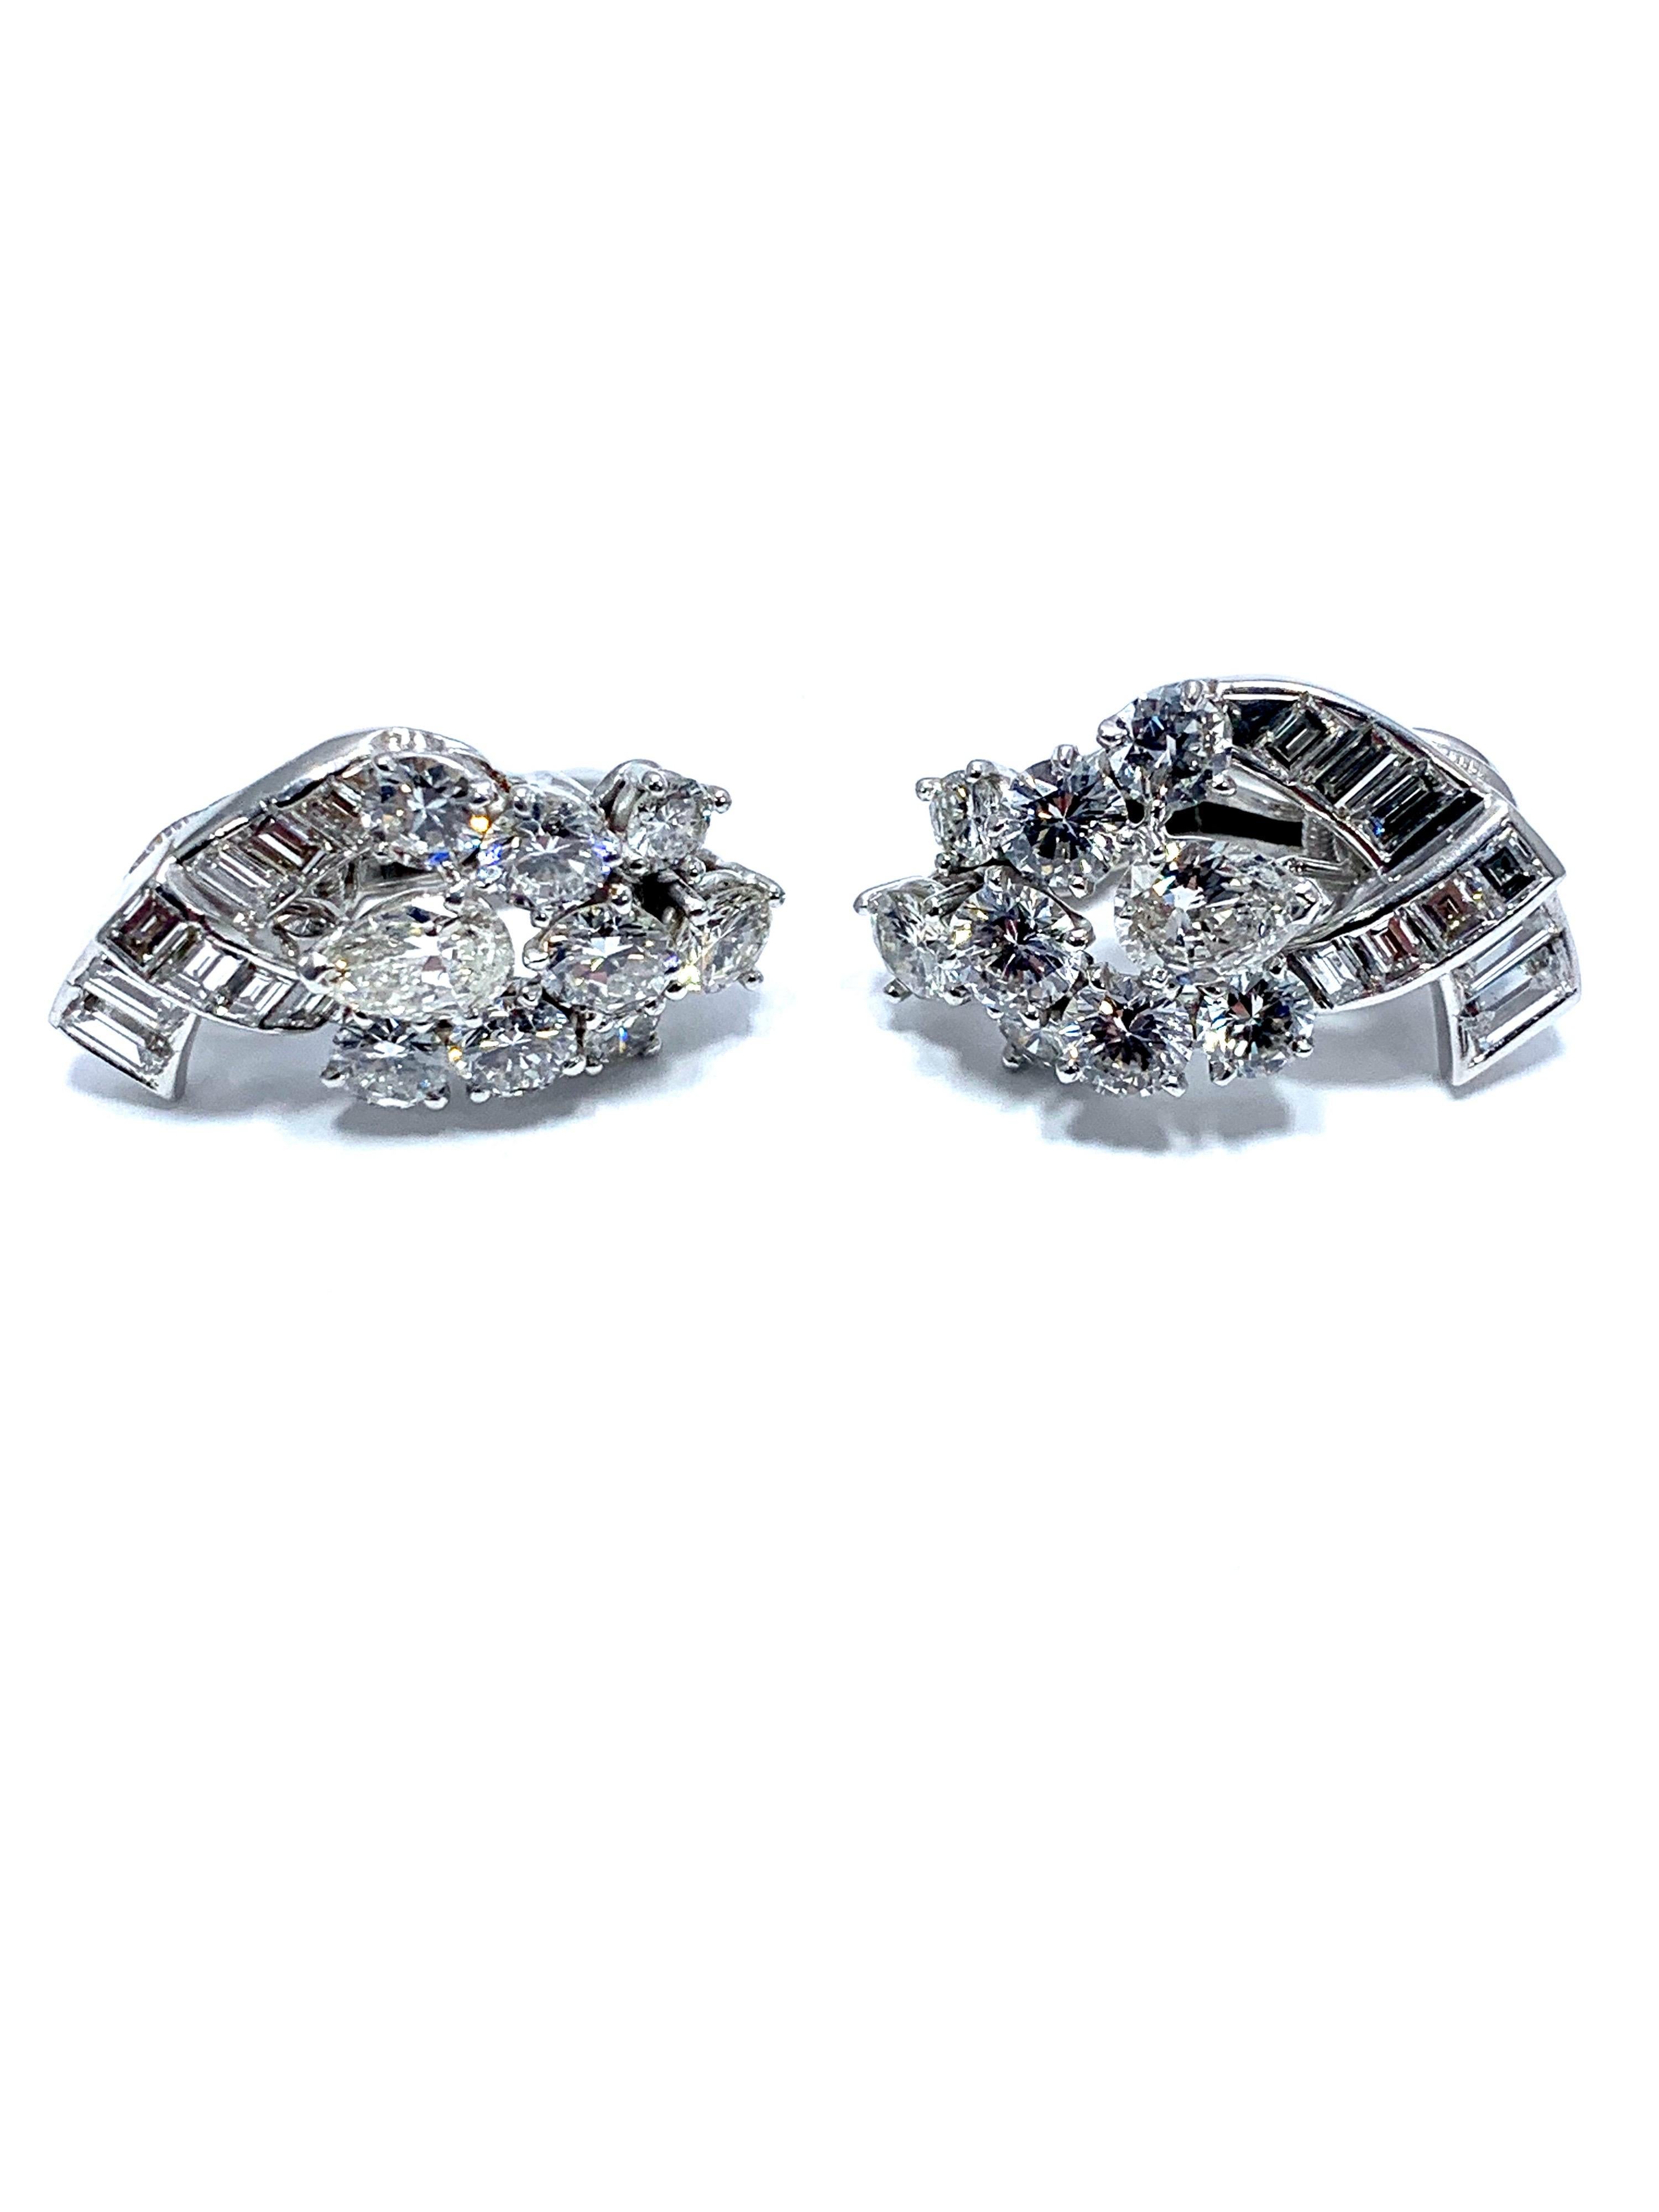 Modern 5.32 Carat Diamond and Platinum Clip Earrings For Sale